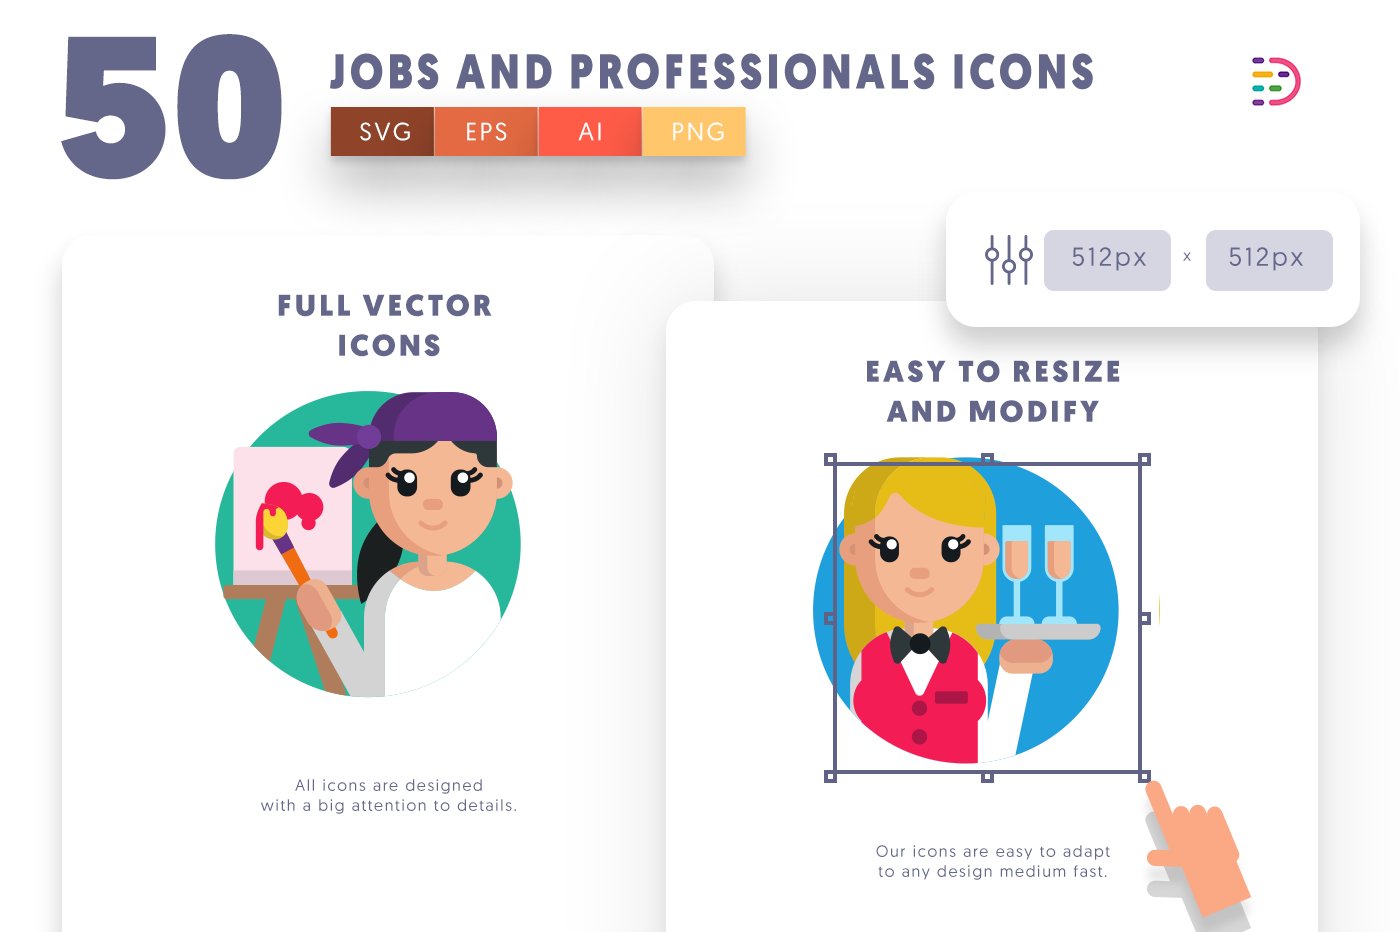 jobandprofessionals icons cover 6 562